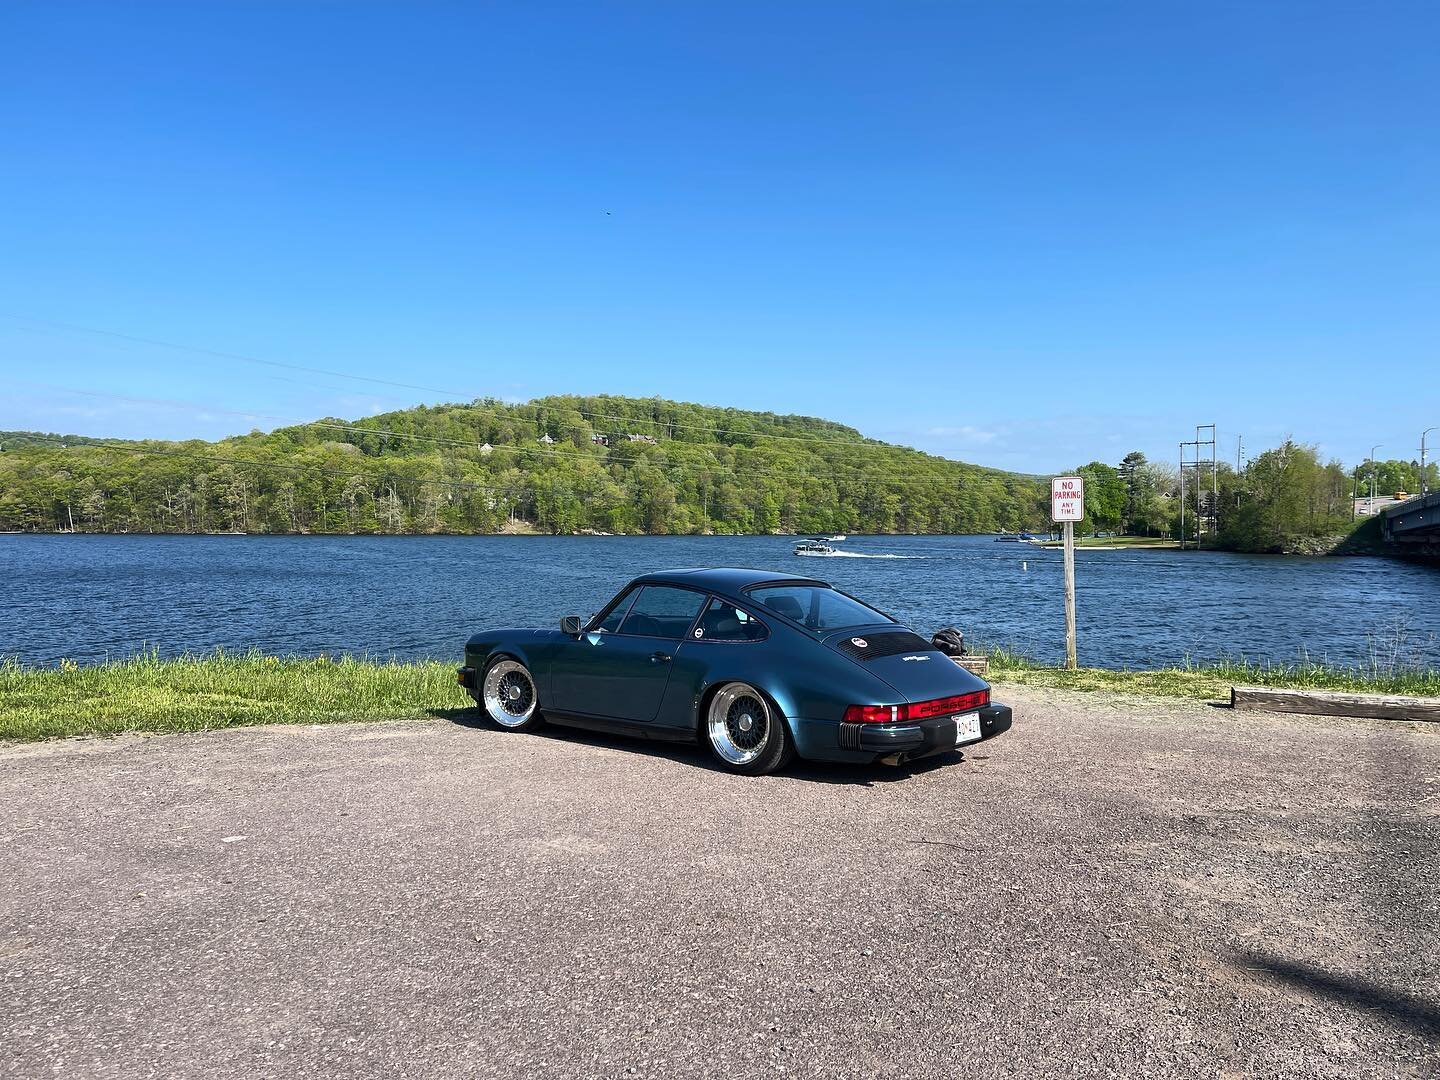 Early photoshoot is going down with @shootautography. 
.

@liquimoly.USA.Canada and @open.air.imports 
Present
@dubsatthelake
May 19-21, 2023
Garrett County Fairgrounds
McHenry, Maryland 21541
WWW.DUBSATTHELAKE.COM 
DUBS AT THE LAKE , your premier Vo